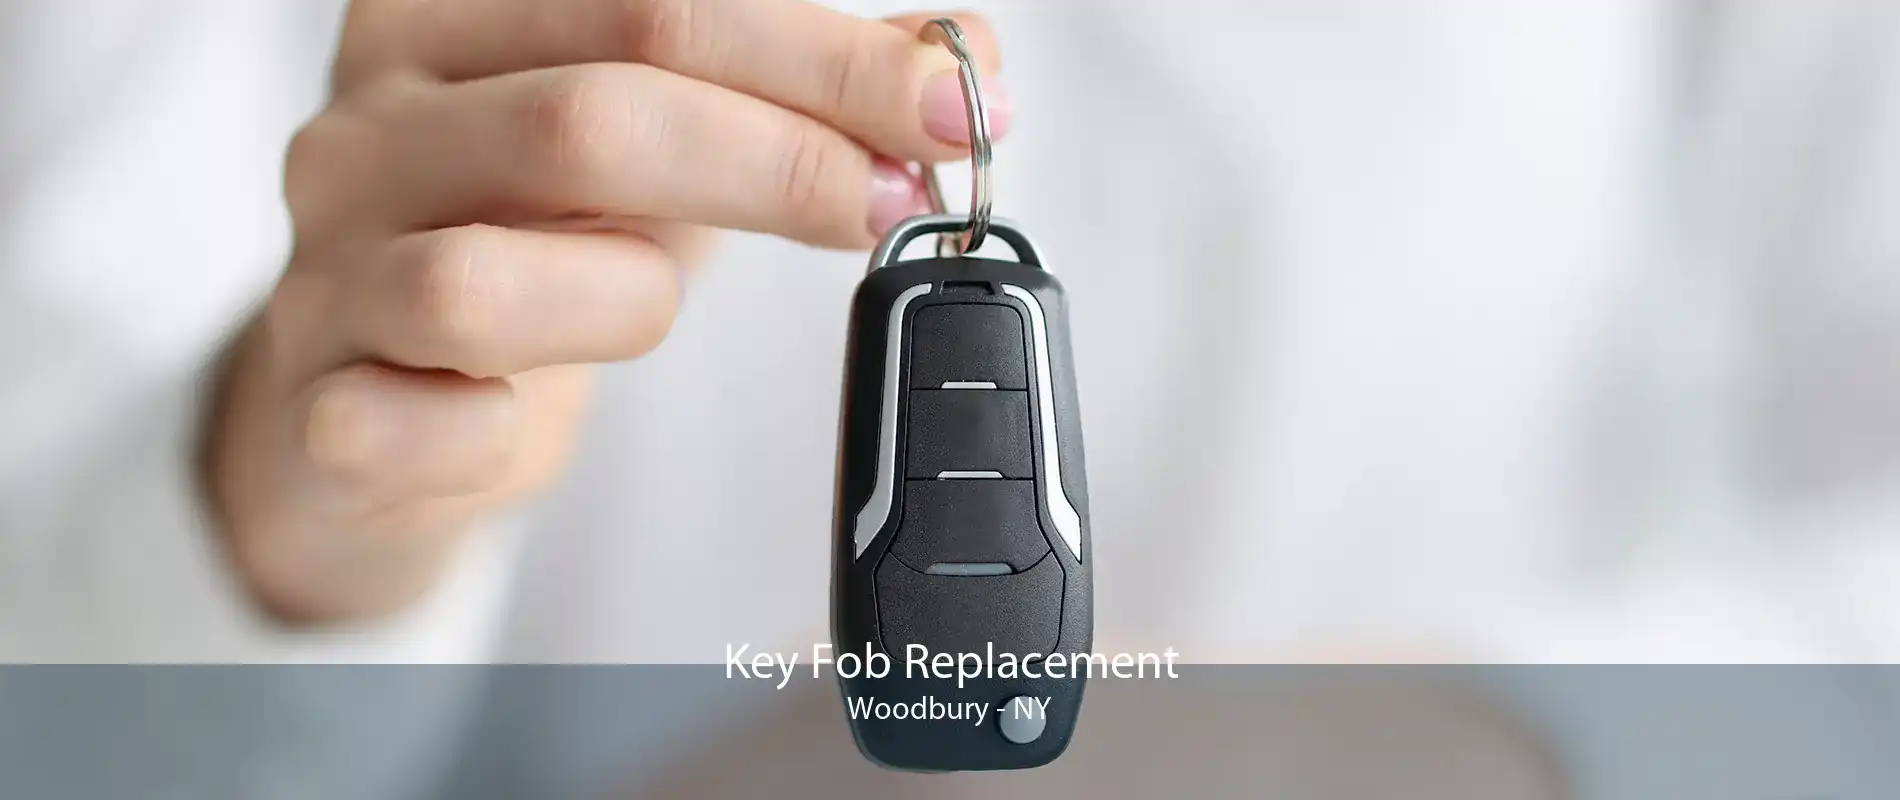 Key Fob Replacement Woodbury - NY